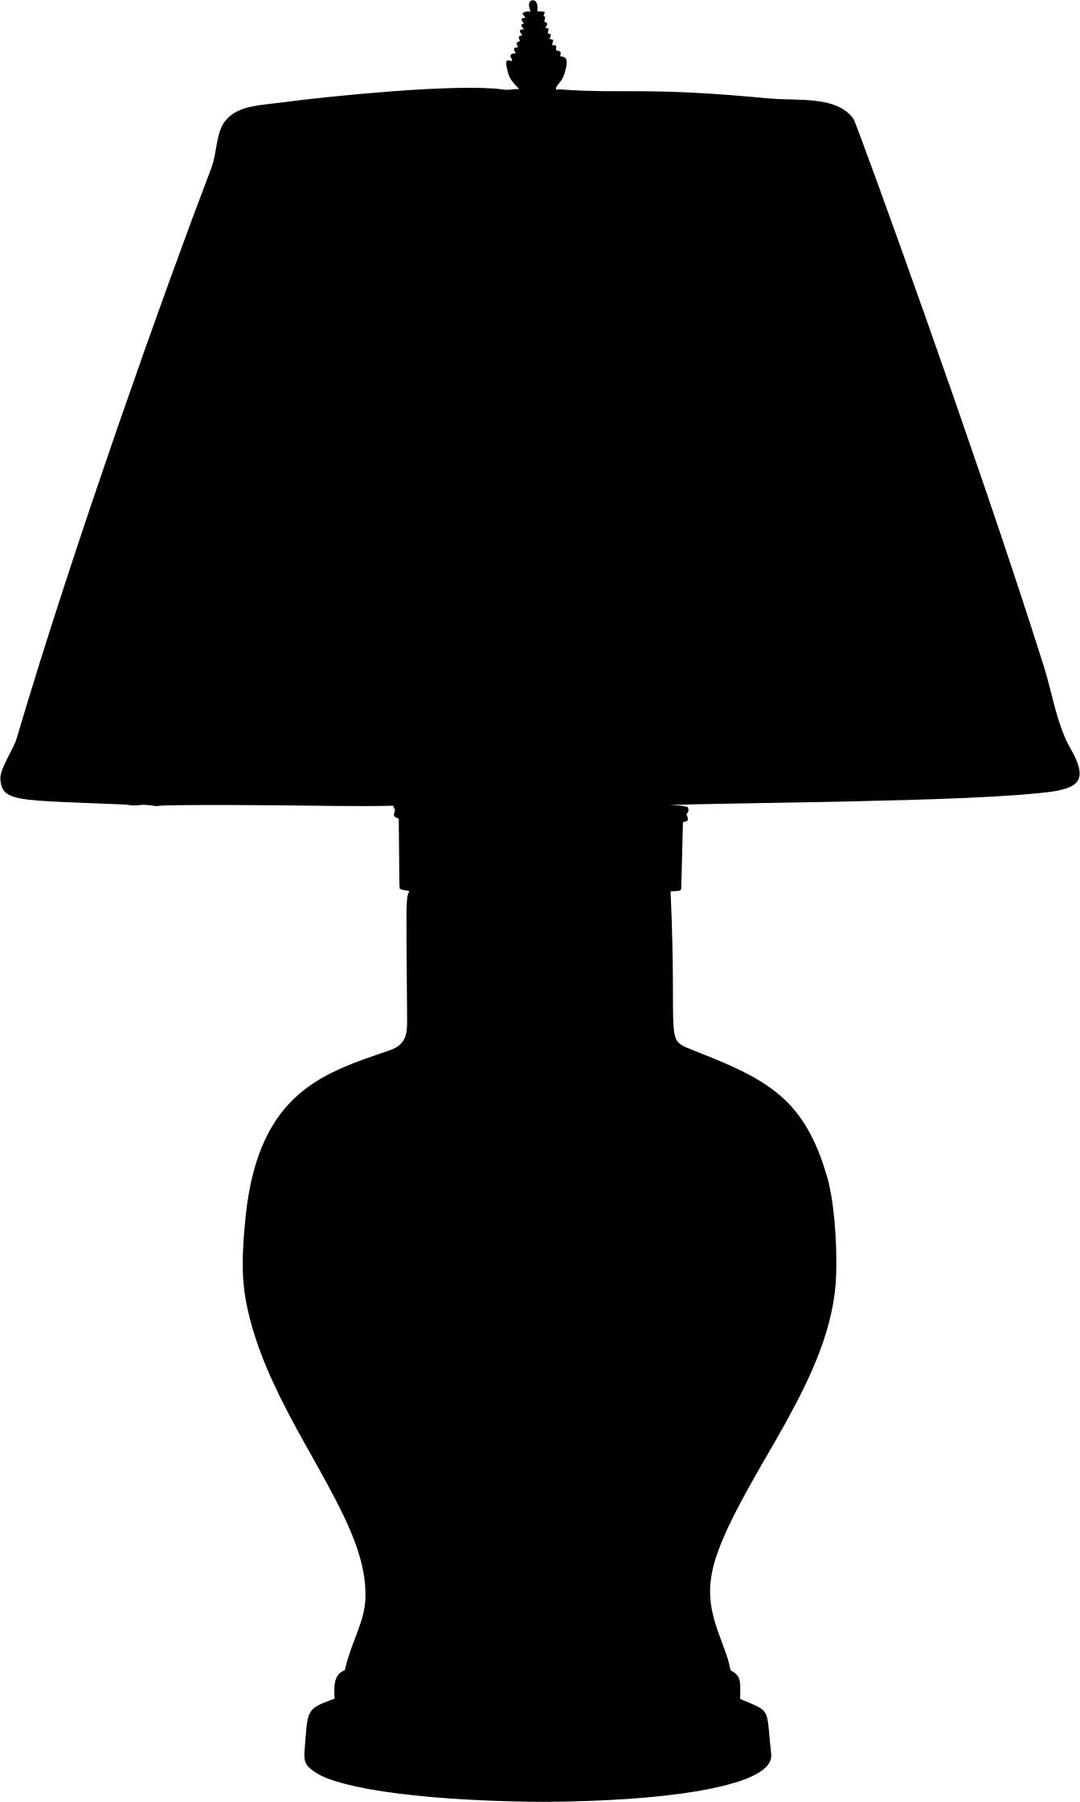 Table Lamp Silhouette png transparent